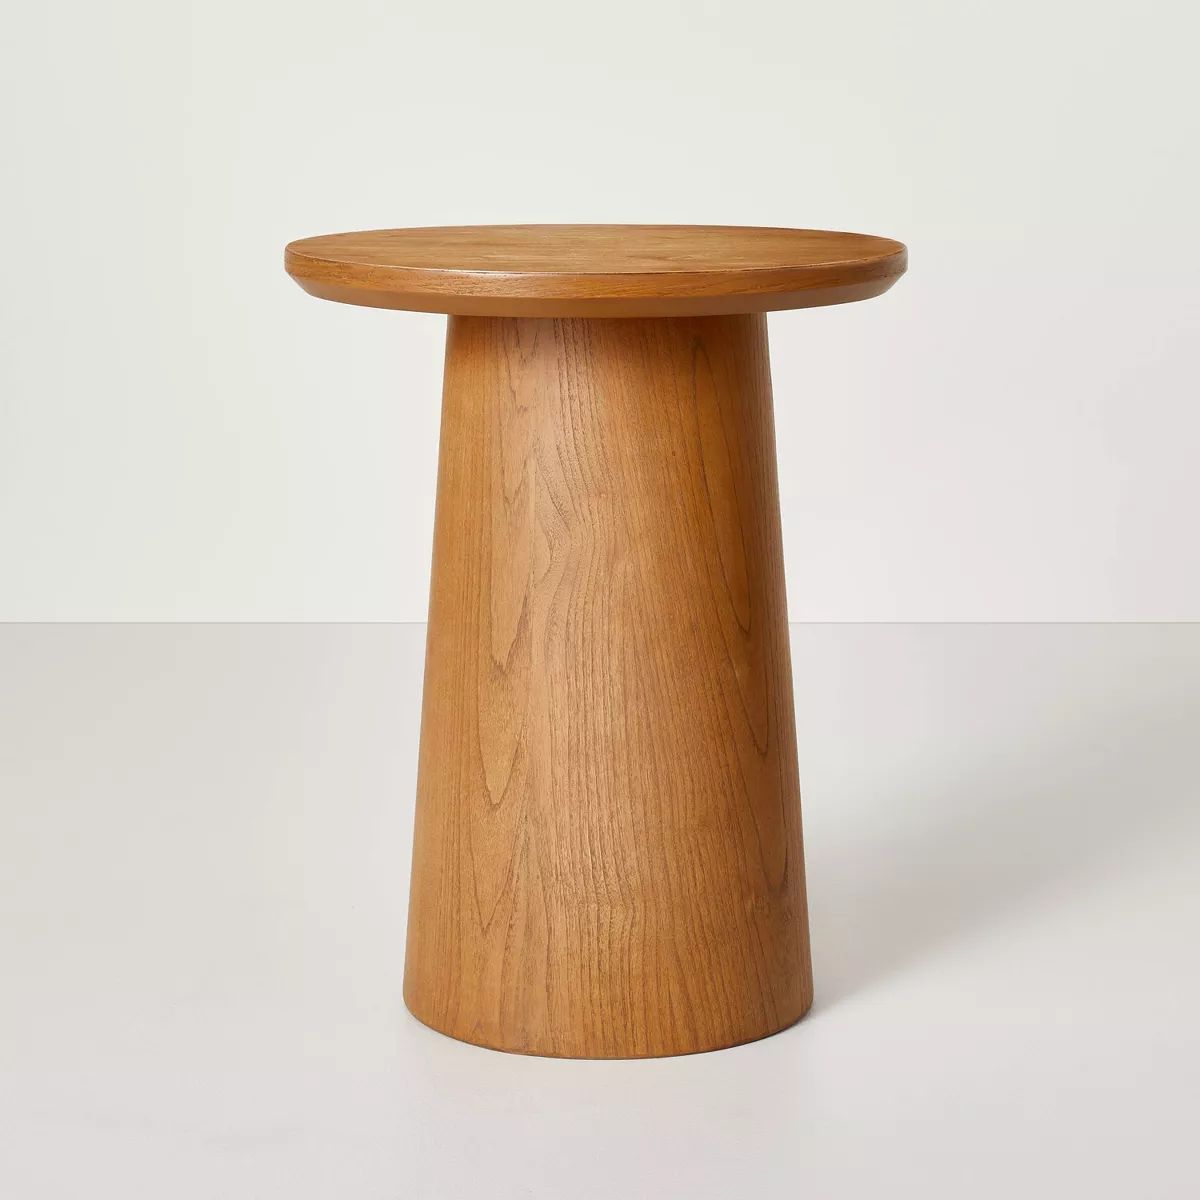 Wooden Round Pedestal Accent Side Table - Hearth & Hand™ with Magnolia | Target